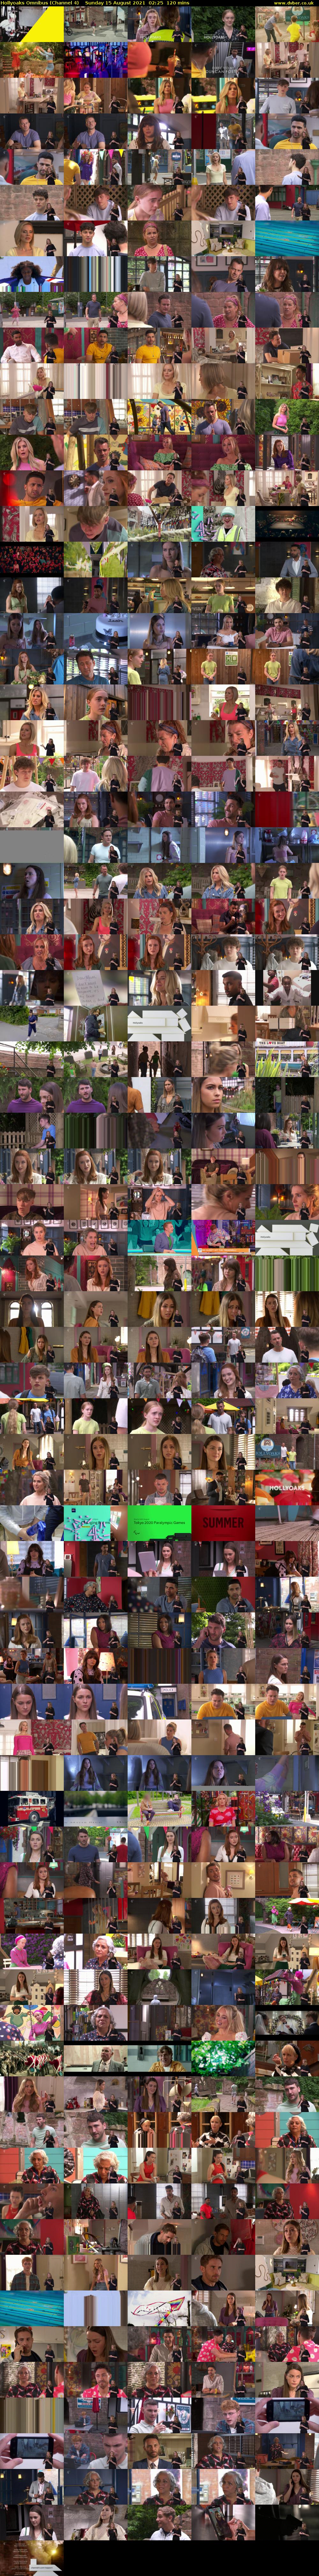 Hollyoaks Omnibus (Channel 4) Sunday 15 August 2021 02:25 - 04:25